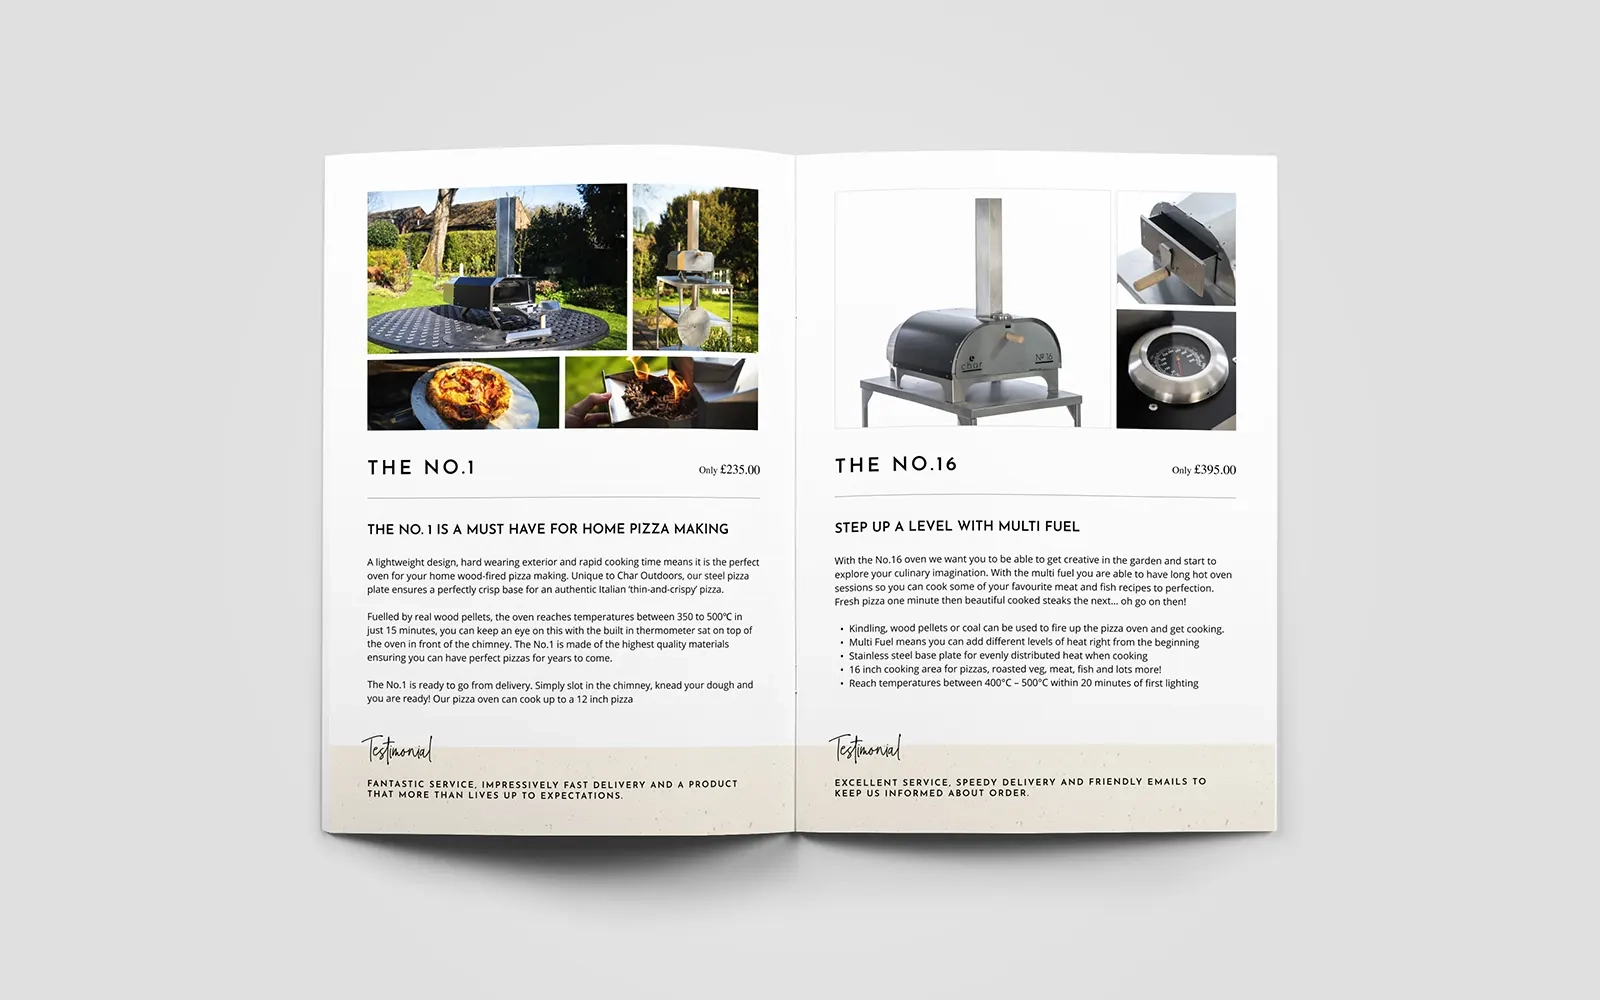 A two page spread of the brochure showing photos and information about the pizza ovens on offer